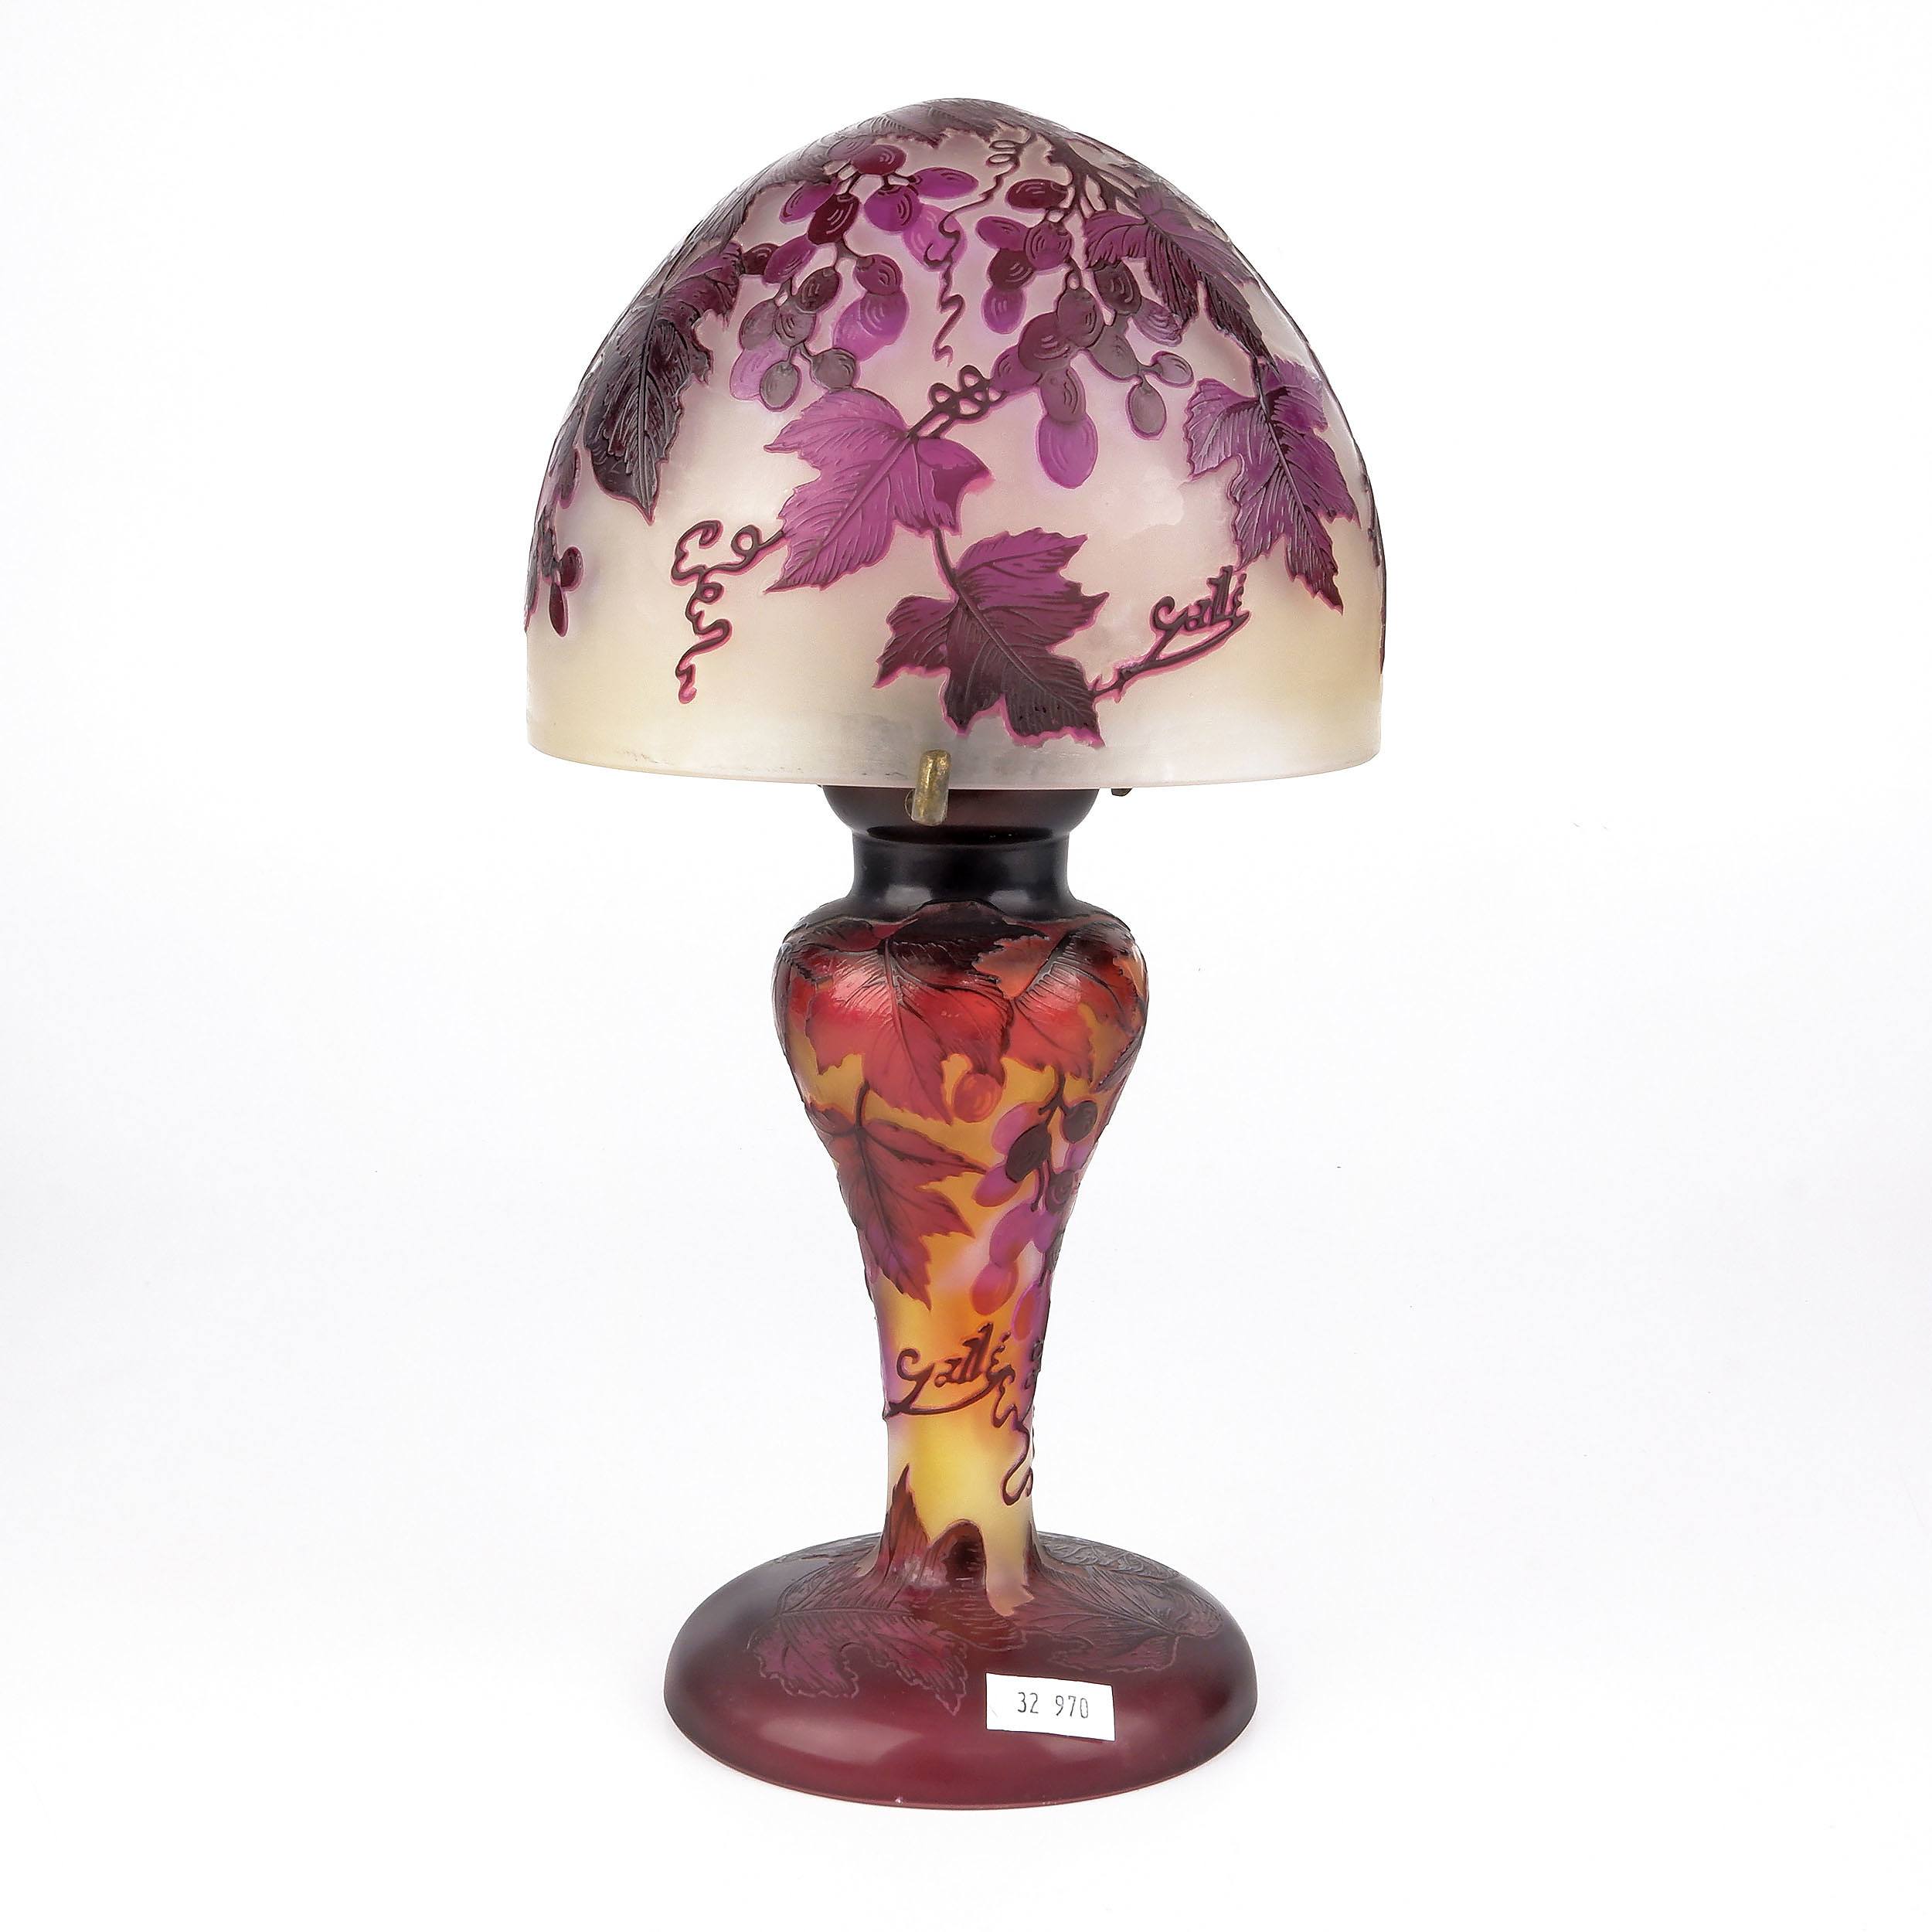 'Emile Galle (French 1864-1904) Wheel Carved and Acid Cut Double Overlay Cameo Glass Lamp, Circa 1900'